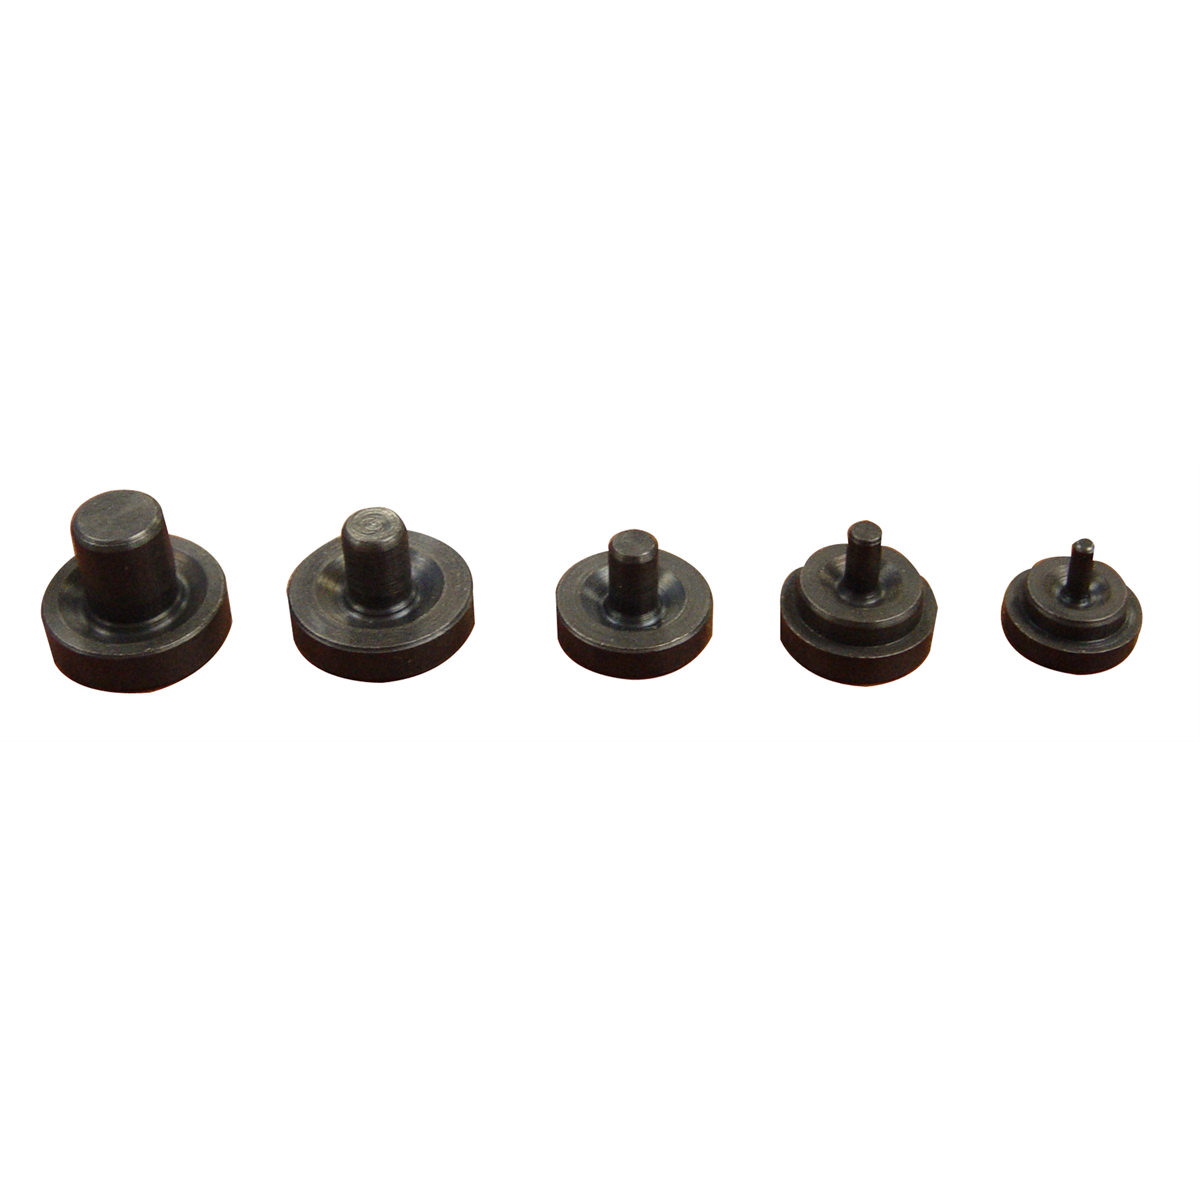 Set of 5 double flaring adapters